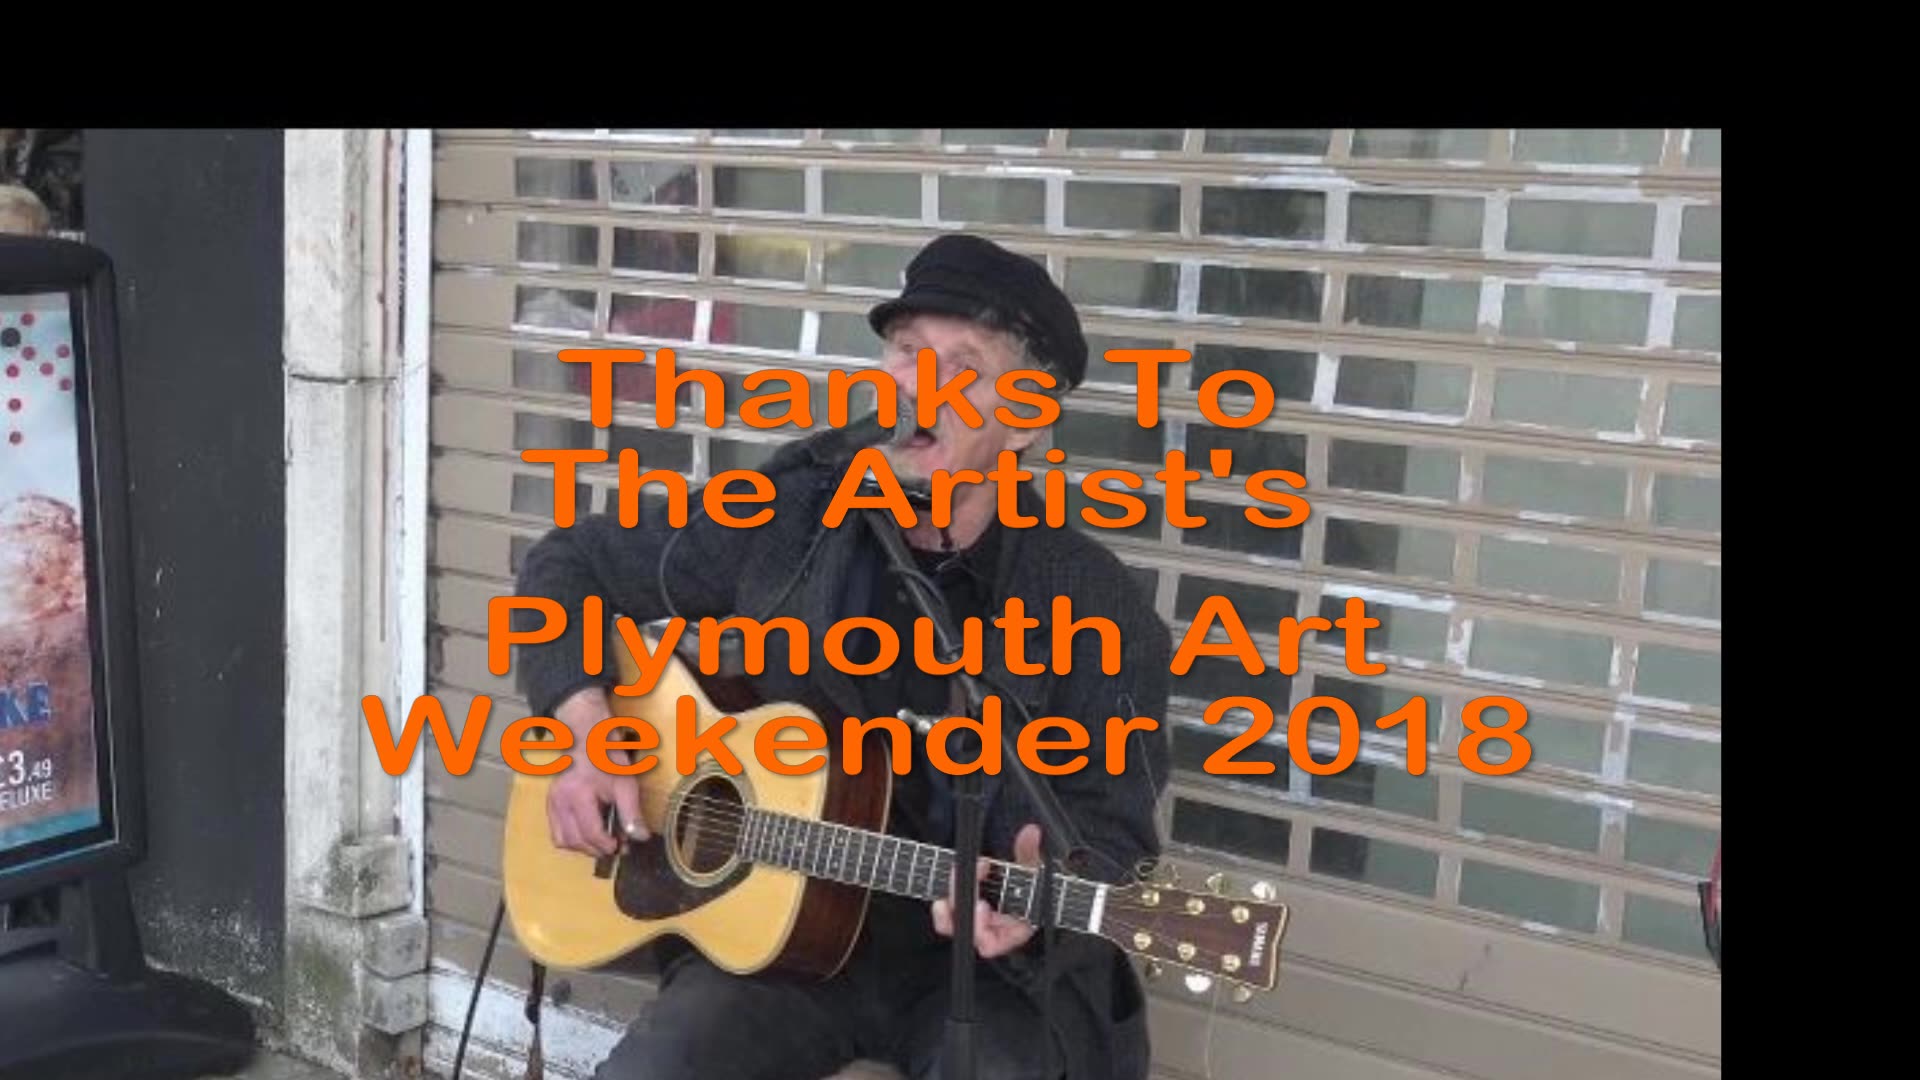 Phill Me Glass Busking in Plymouth Sound of the streets of London. Plymouth Arts Weekender 2018.